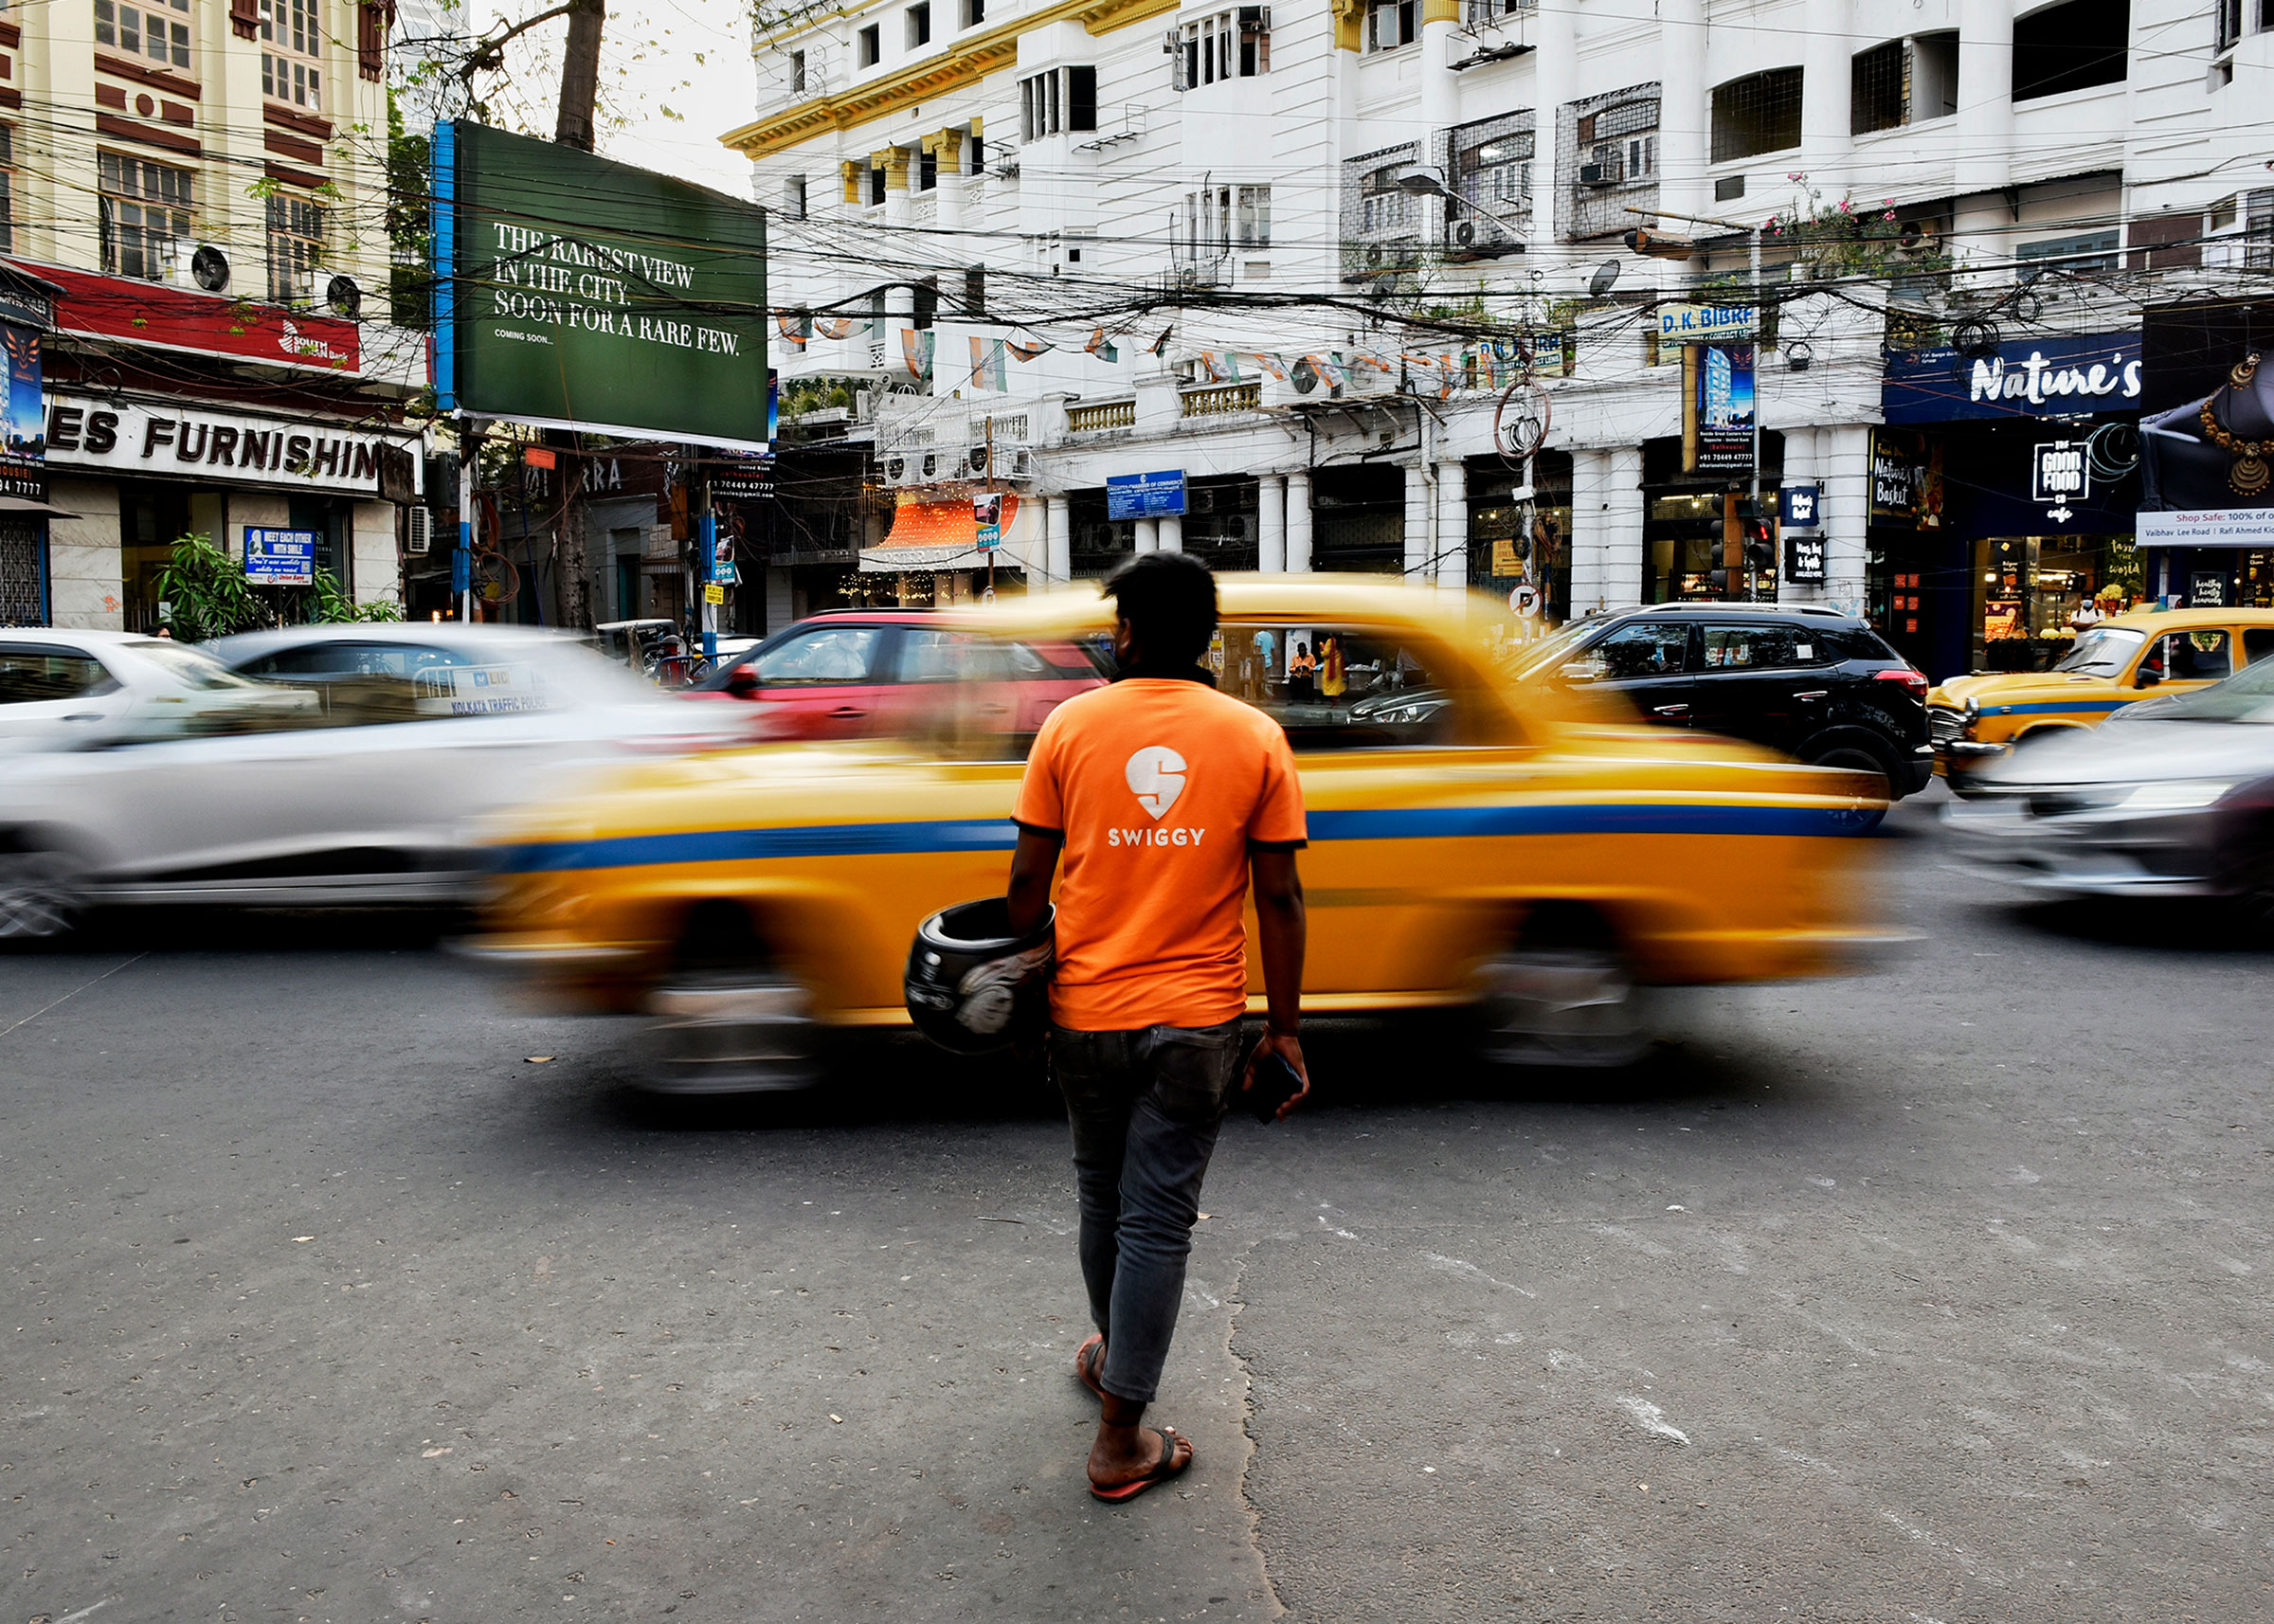 A Swiggy delivery worker crosses a road in Kolkata, India, March 22, 2022. (Indranil Aditya—NurPhoto/Getty Images)